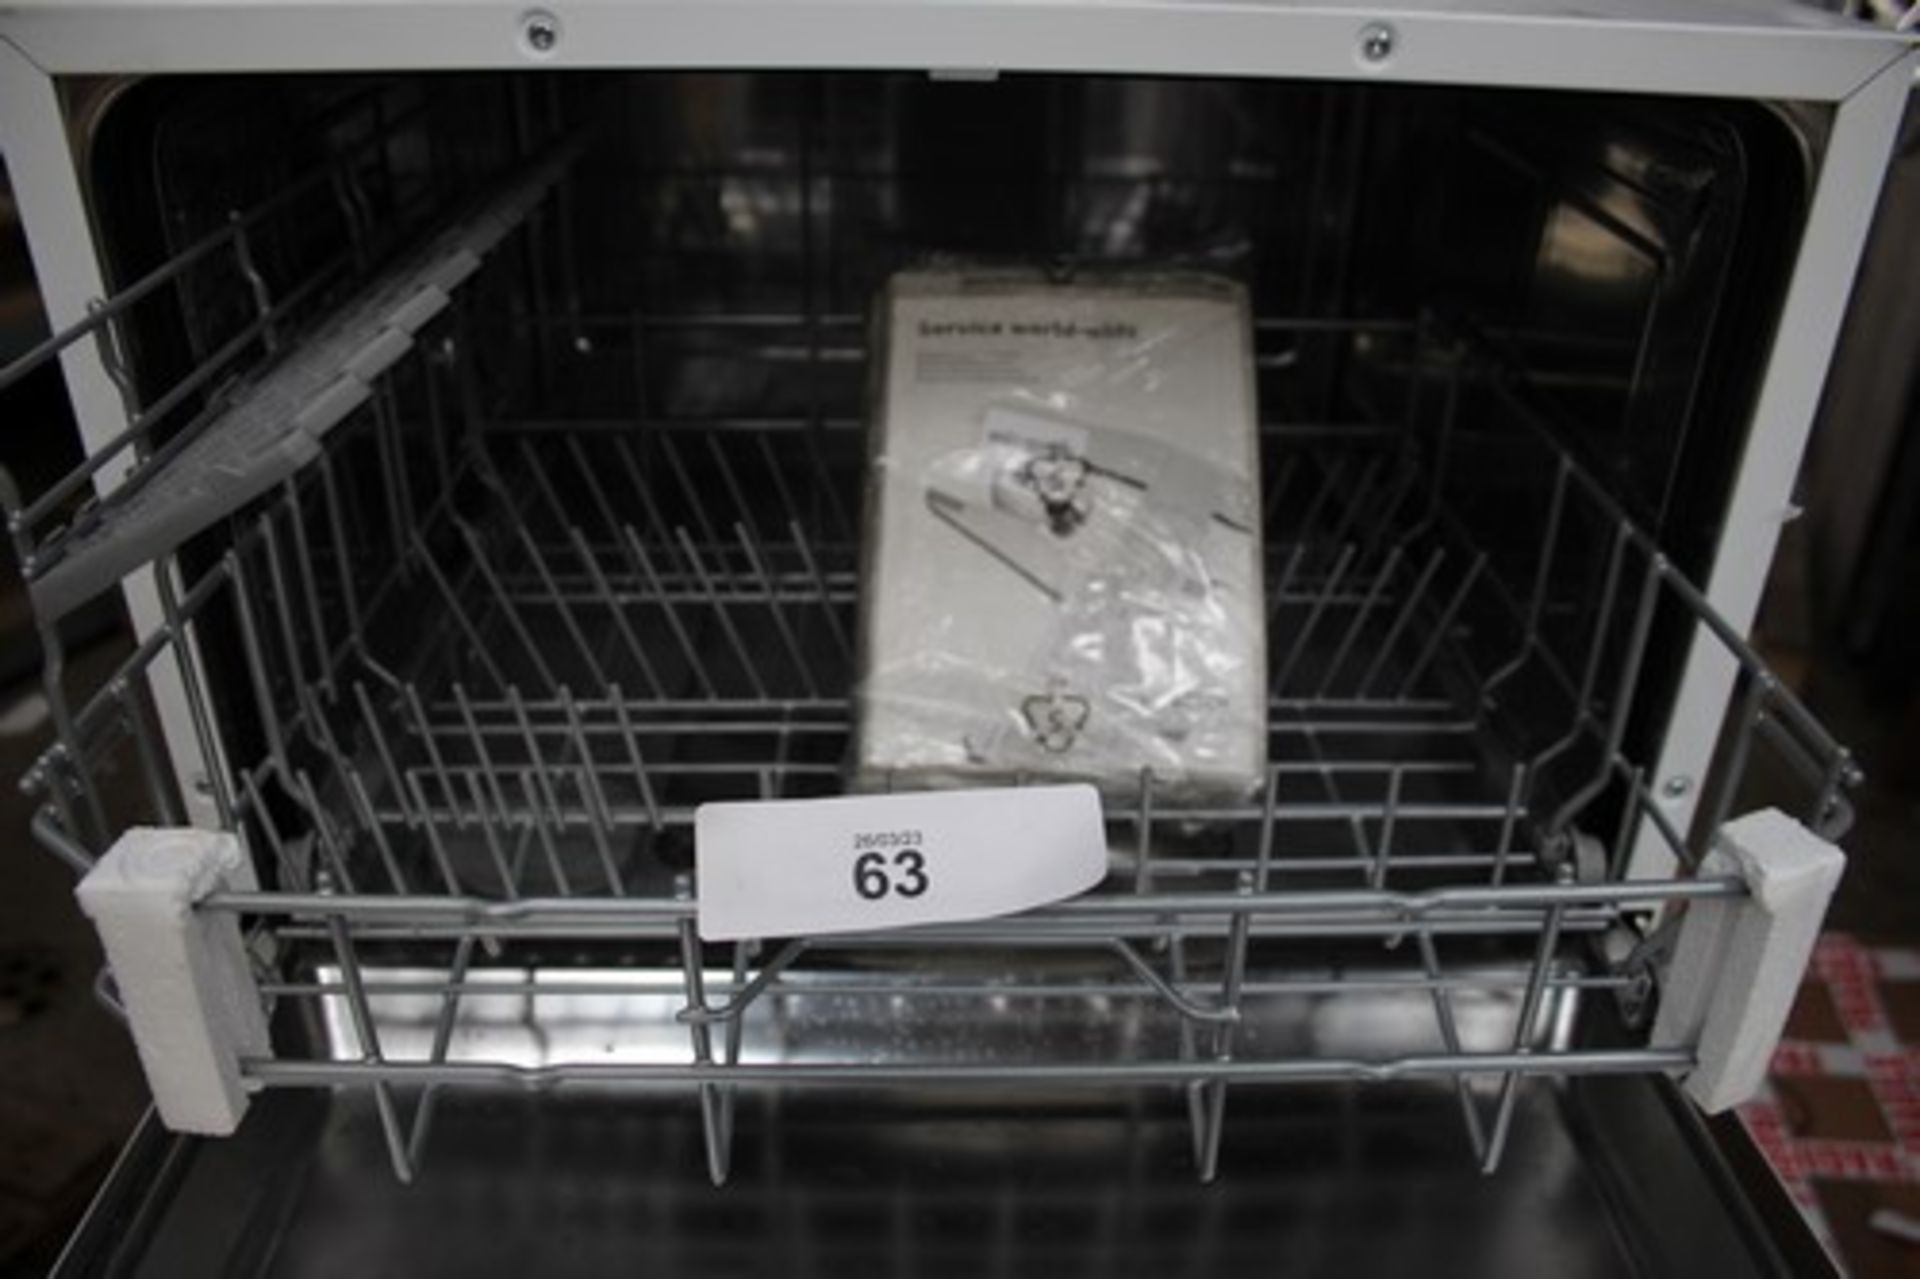 1 x Bosch tabletop compact dishwasher, model SKS62E32EU, damage to right hand corner - New (ES3END) - Image 3 of 7